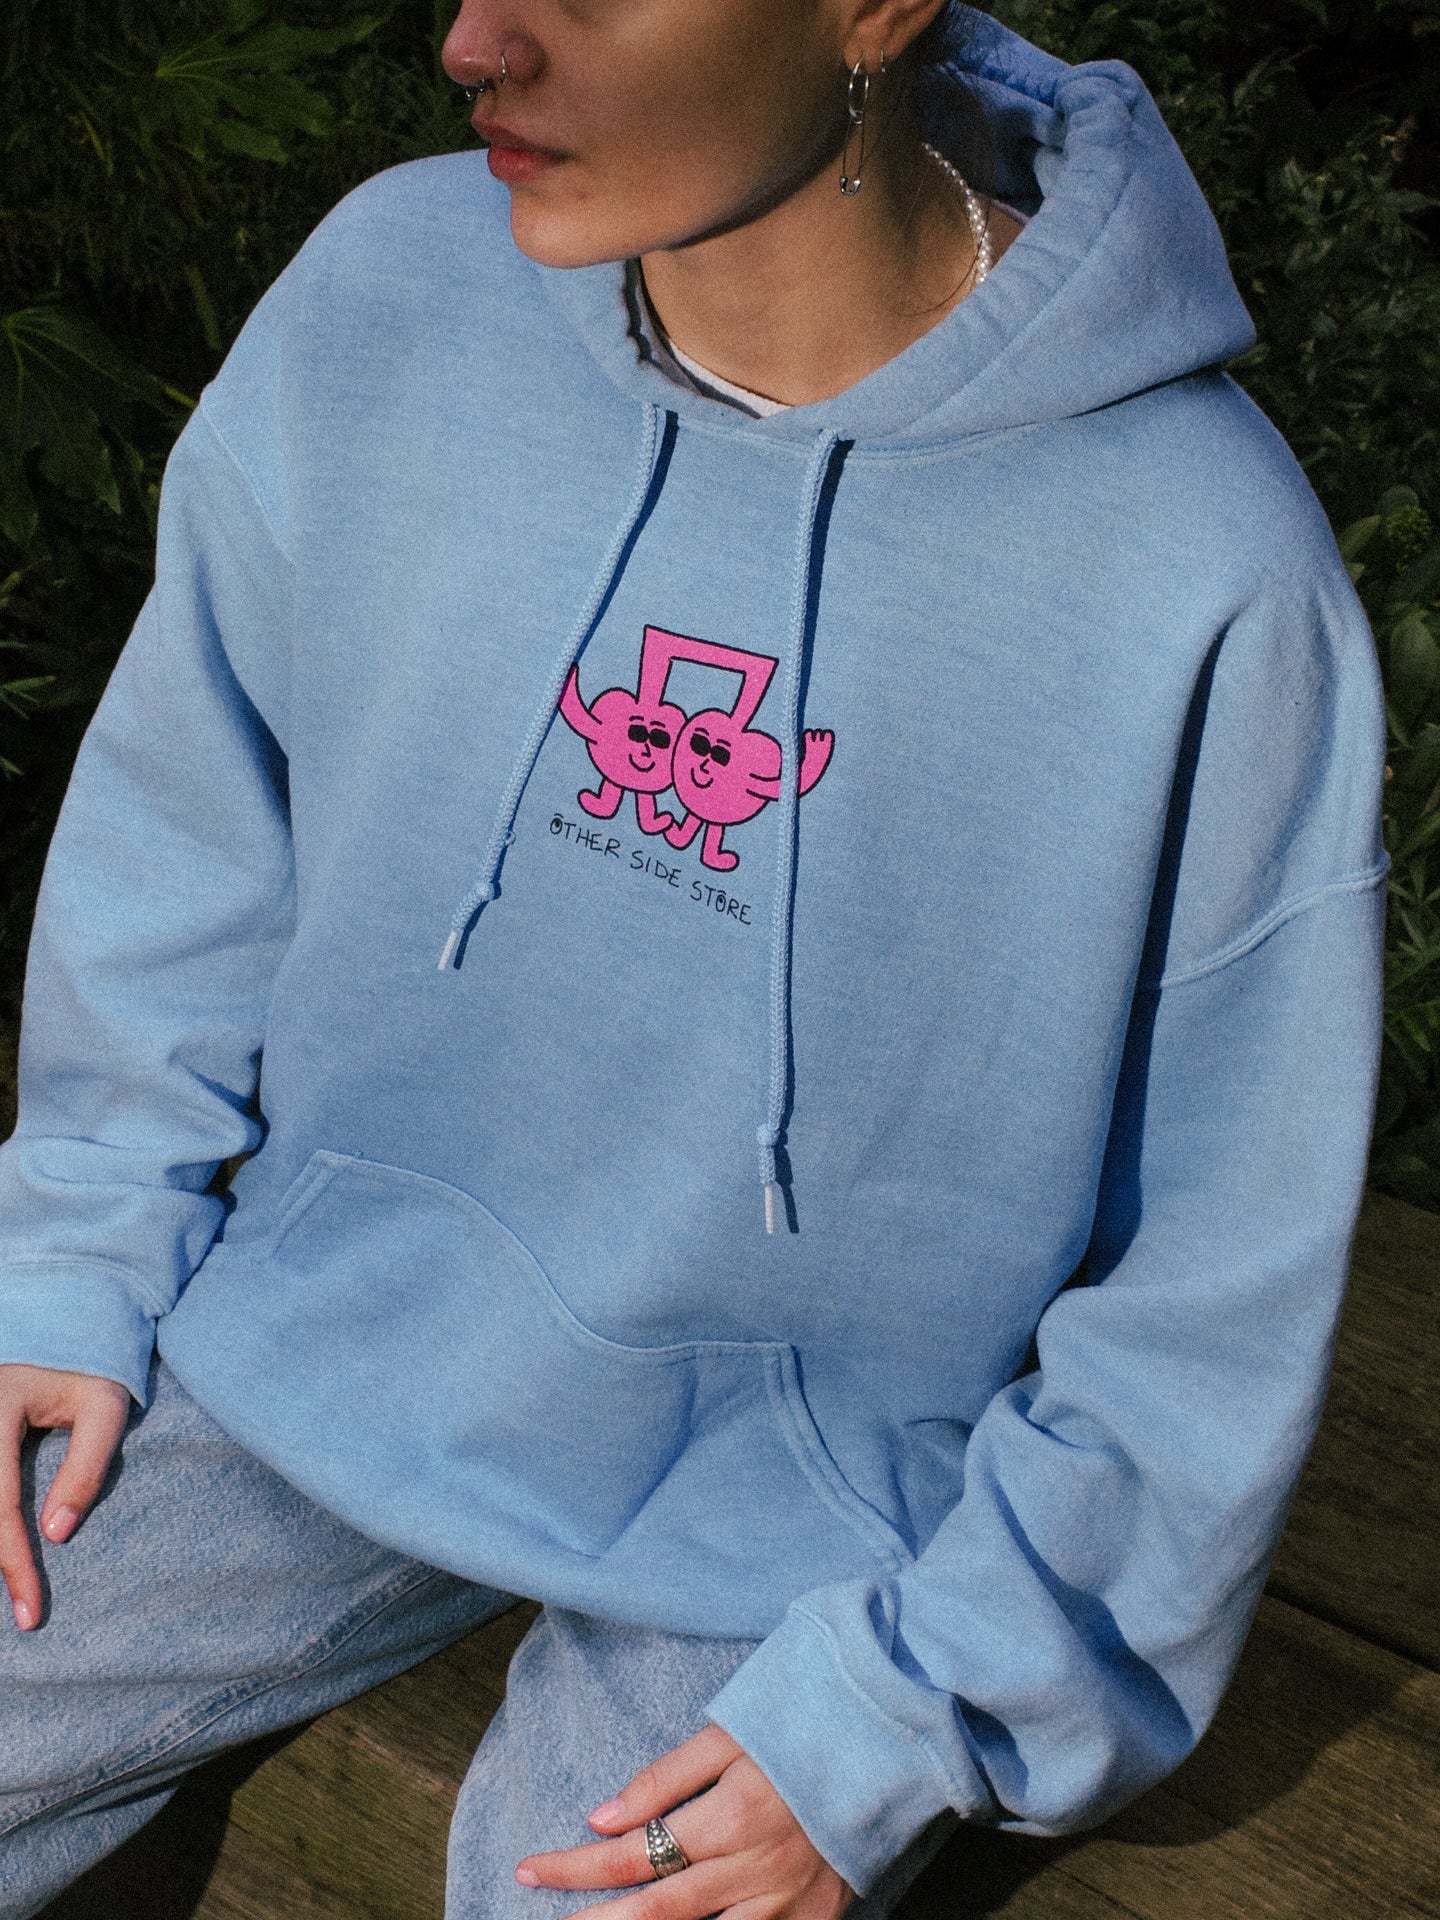 Other Side Store 'Fruity Note' Hoodie - Vintage Washed Baby Blue